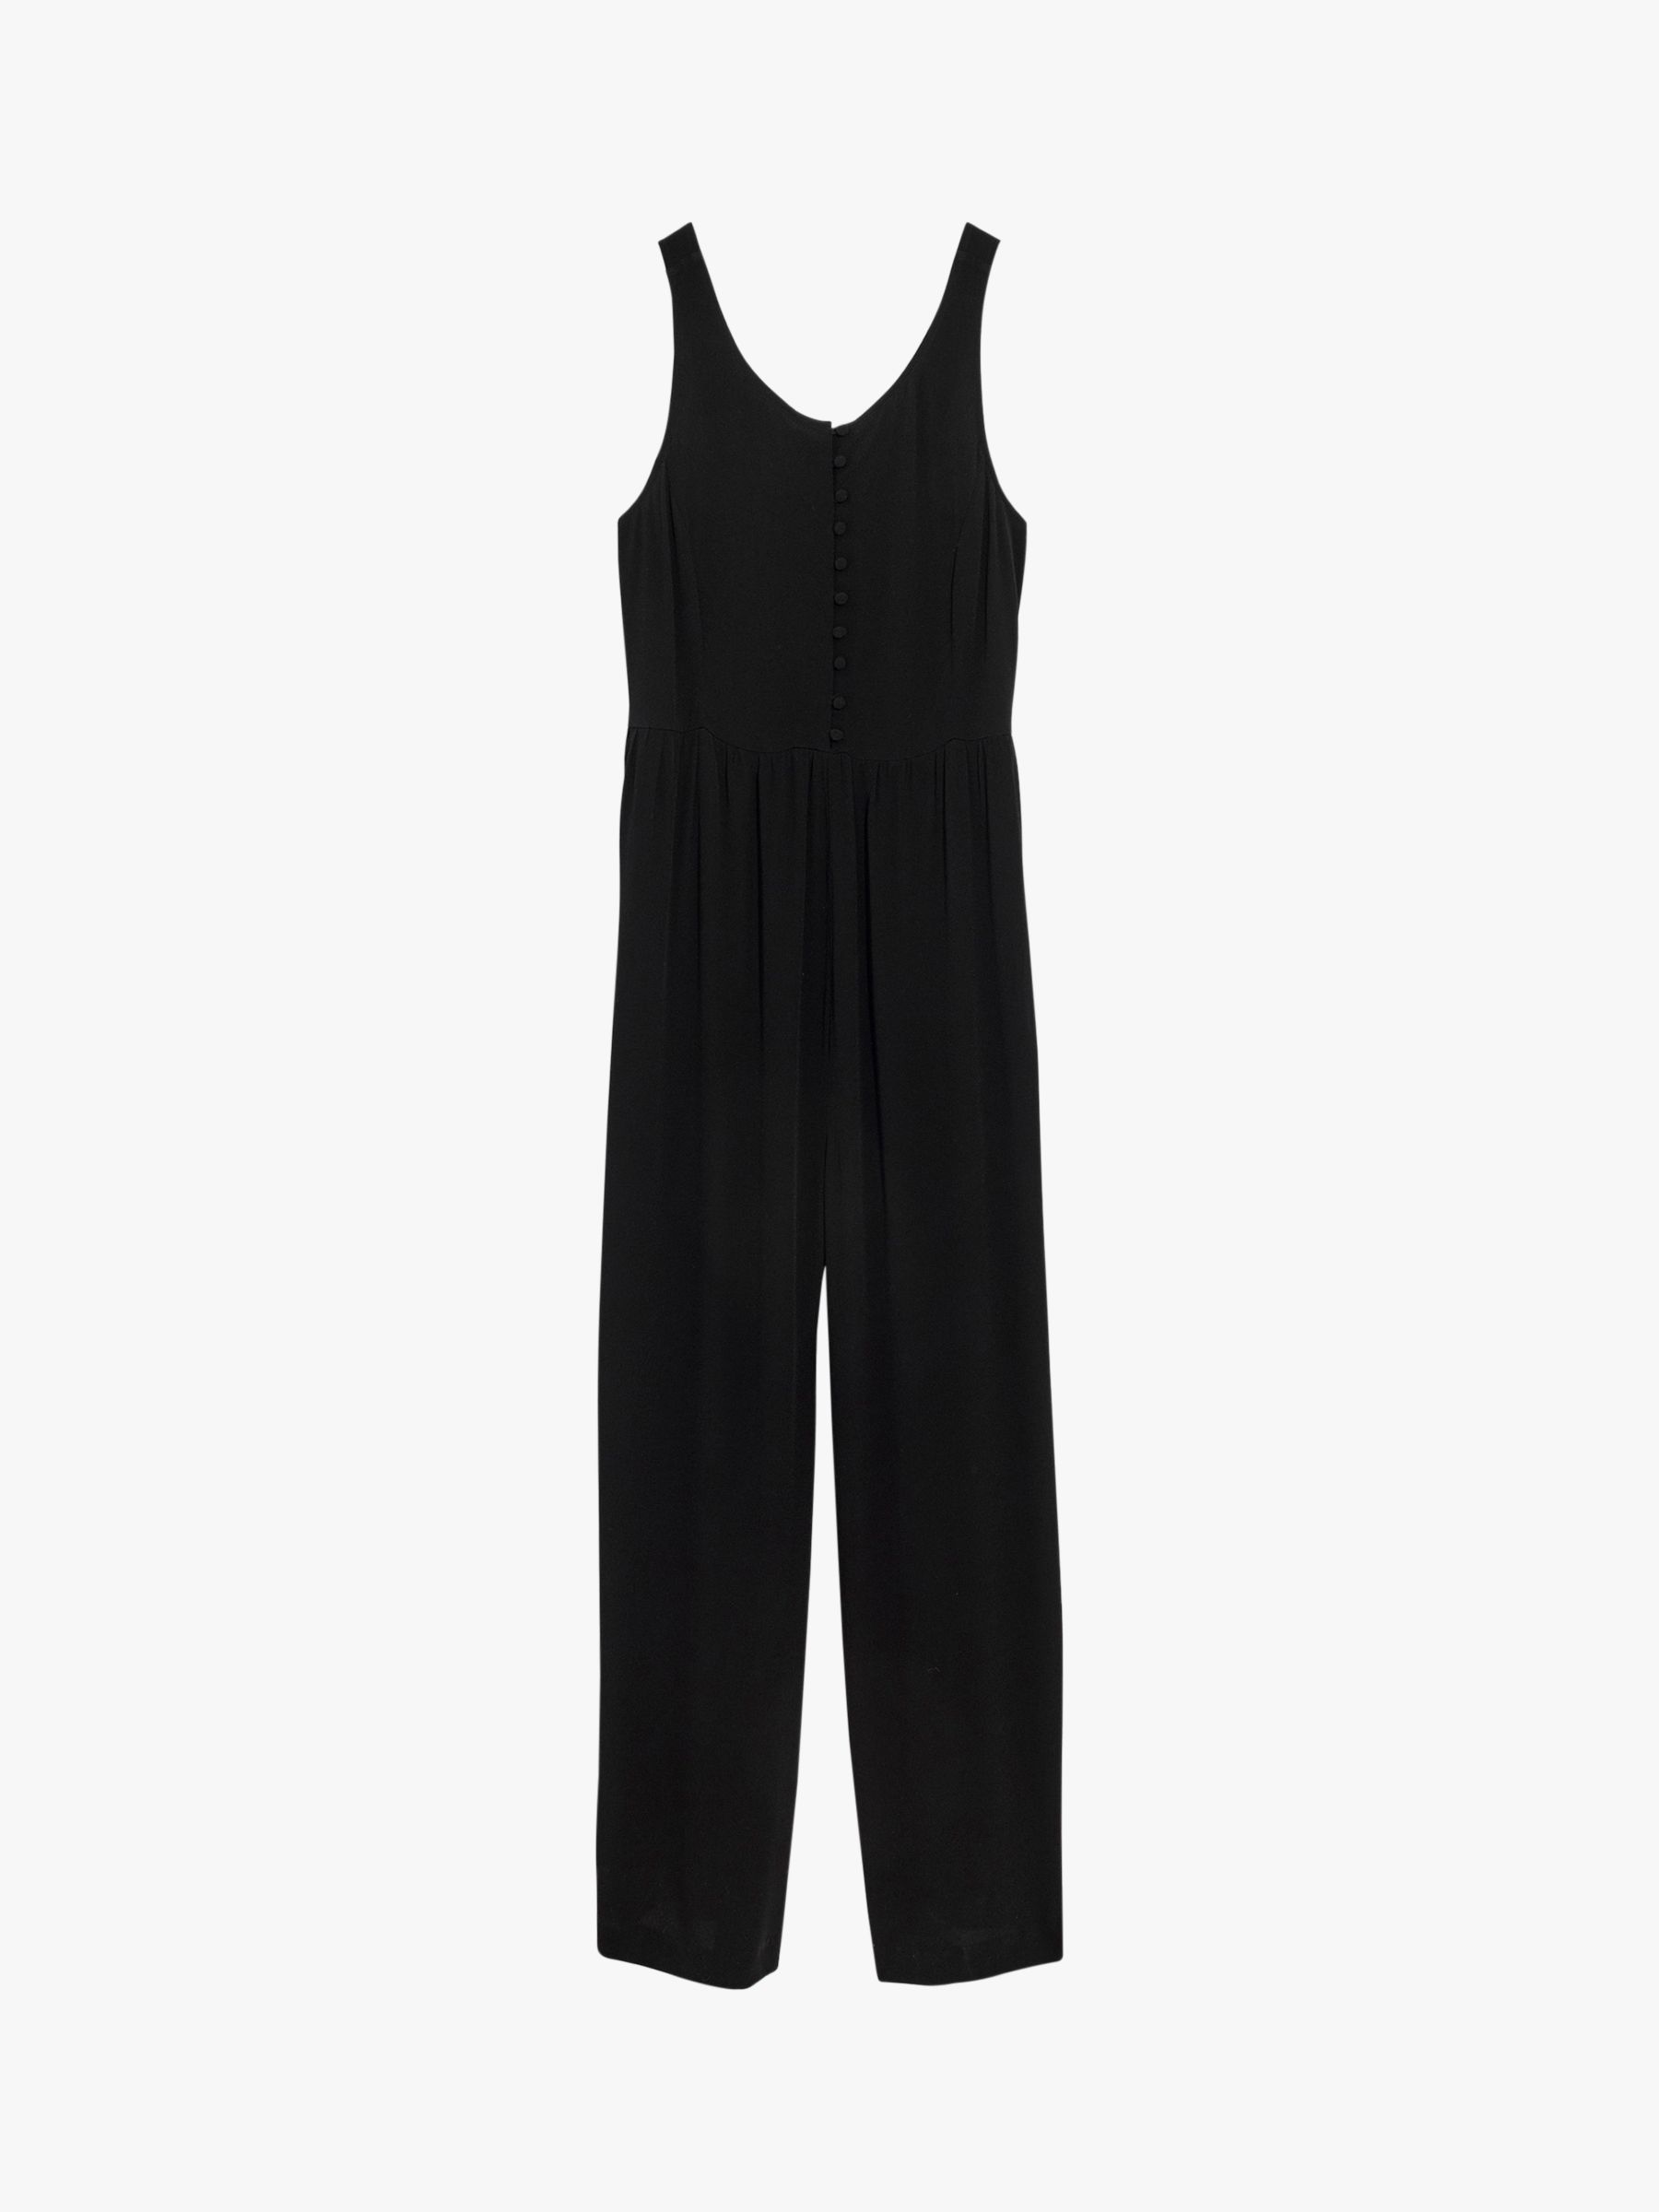 Madewell Smocked Button Front Jumpsuit, True Black